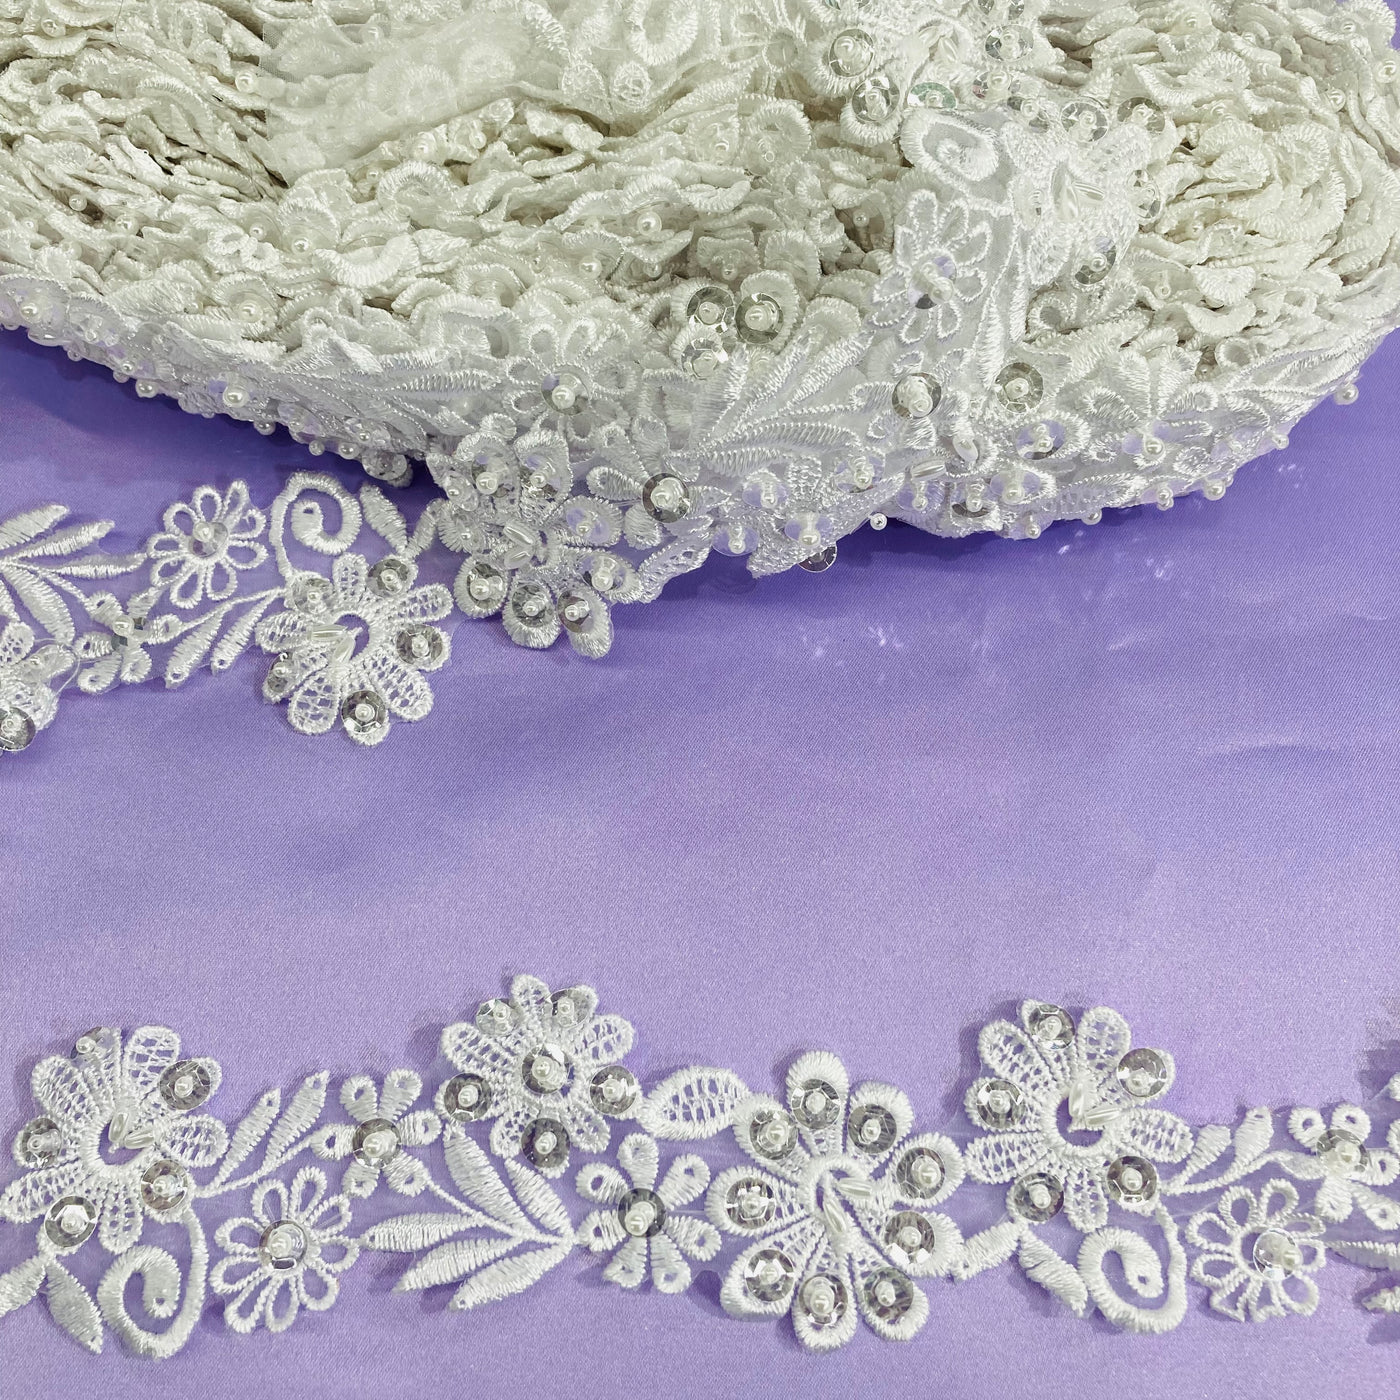 Beaded Lace Trimming Embroidered on Poly Organza. Lace USA